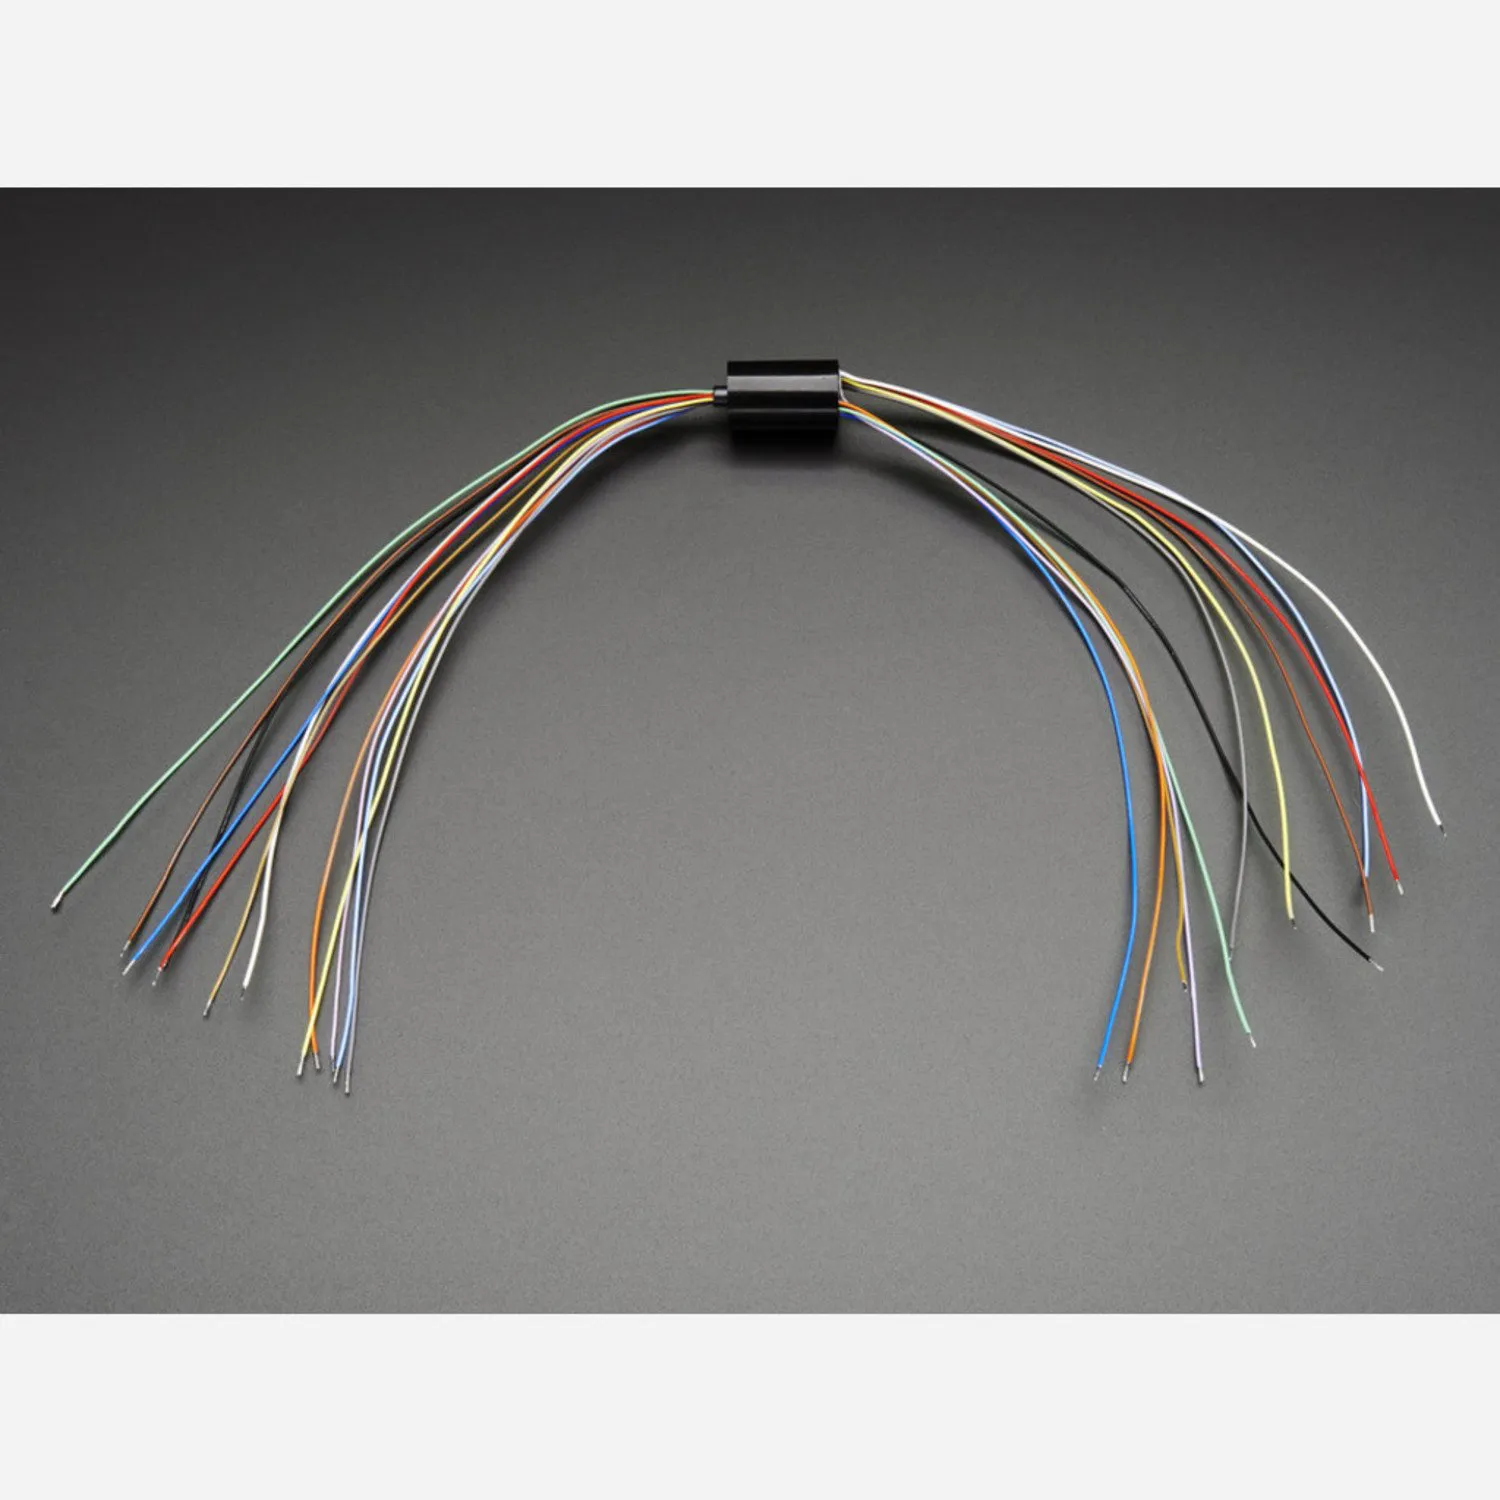 Photo of Miniature Slip Ring - 12mm diameter, 12 wires, max 240V @ 2A